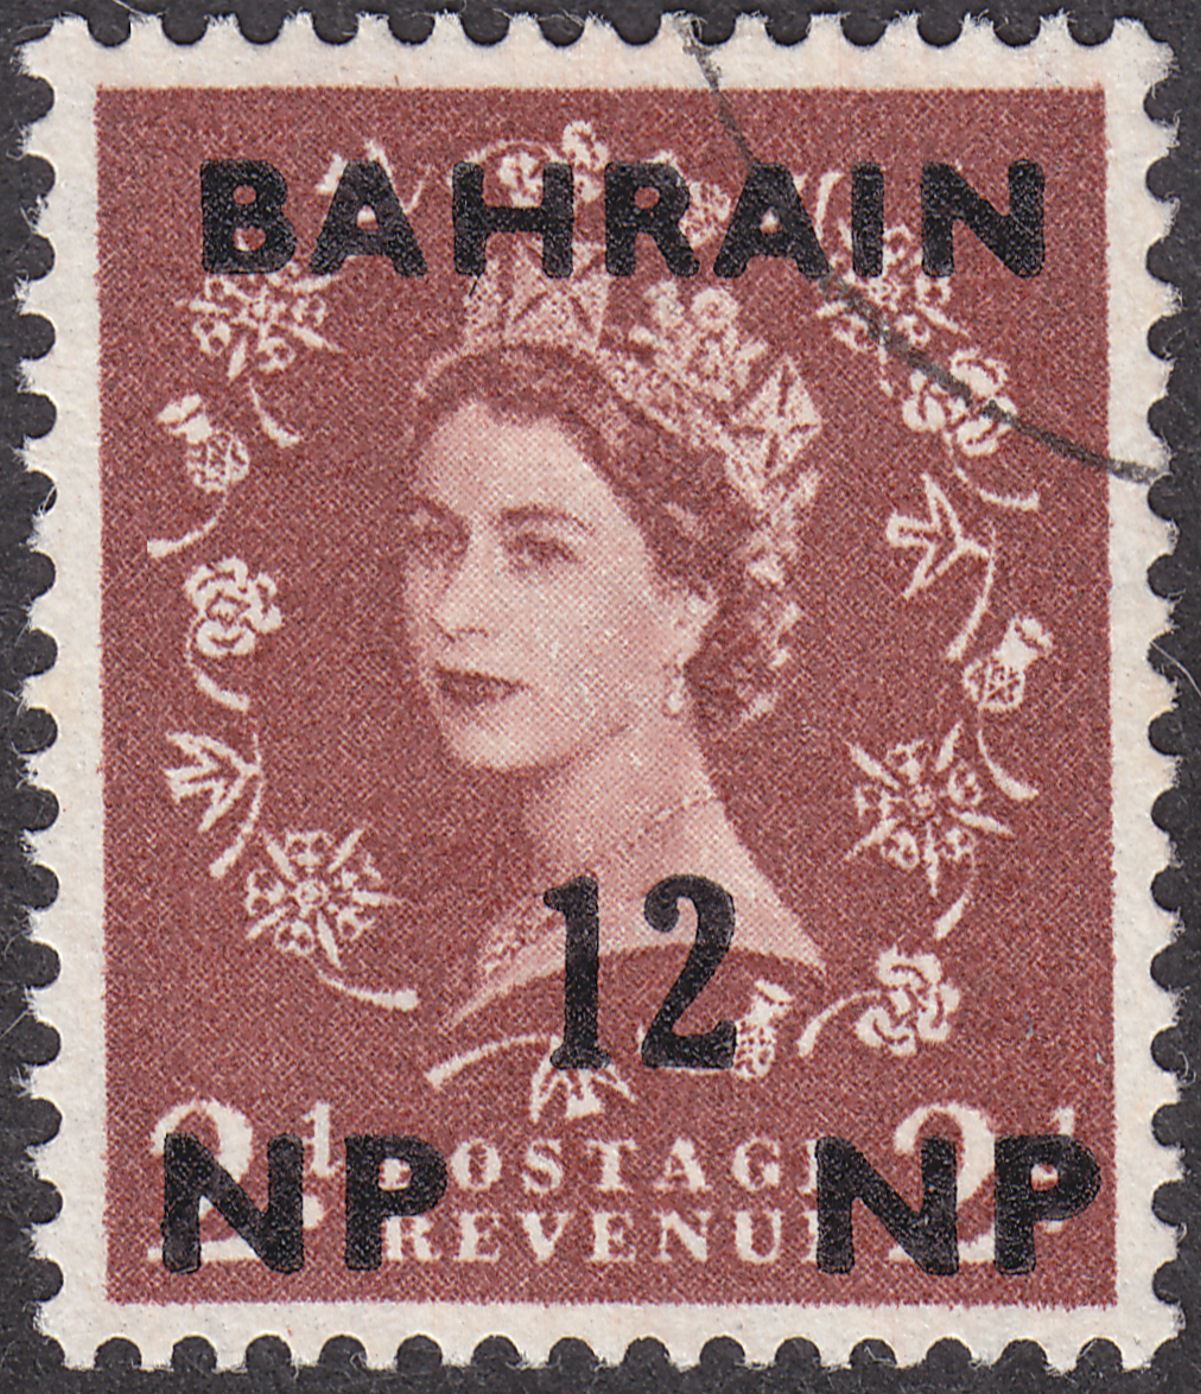 Bahrain 1957 QEII 12np Surcharge on 2d Flaw at Base of Rose Variety Used